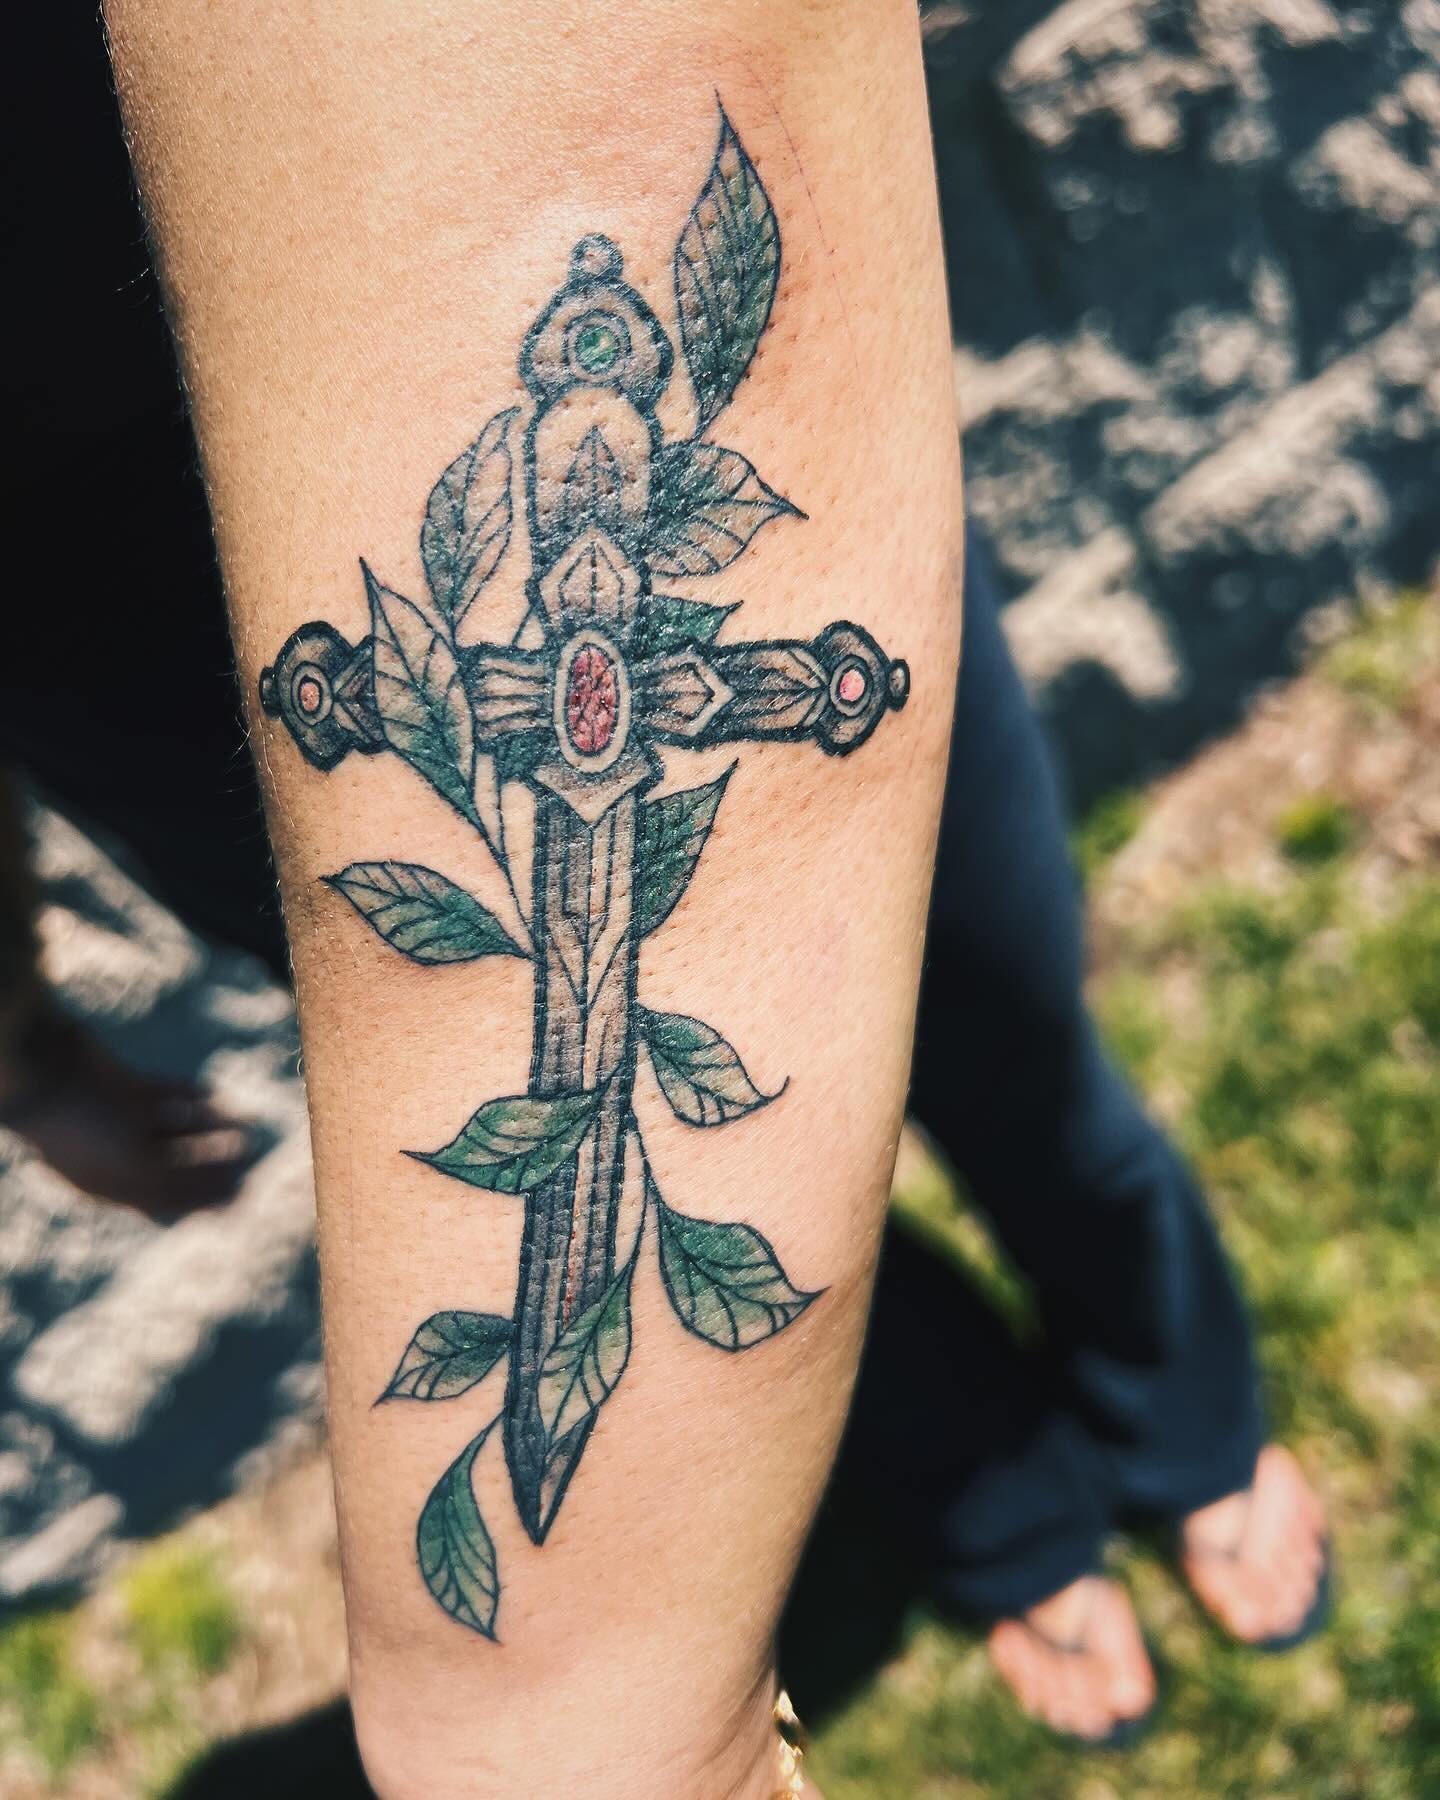 Cross-shaped dagger + leaves for my @k.deebydesign 💗 practiced switching between using four needles, and my shading and laying down some bits of color (muted enough for Katie to actually like the color green) :)
.
#tattooapprentice #learning #growin